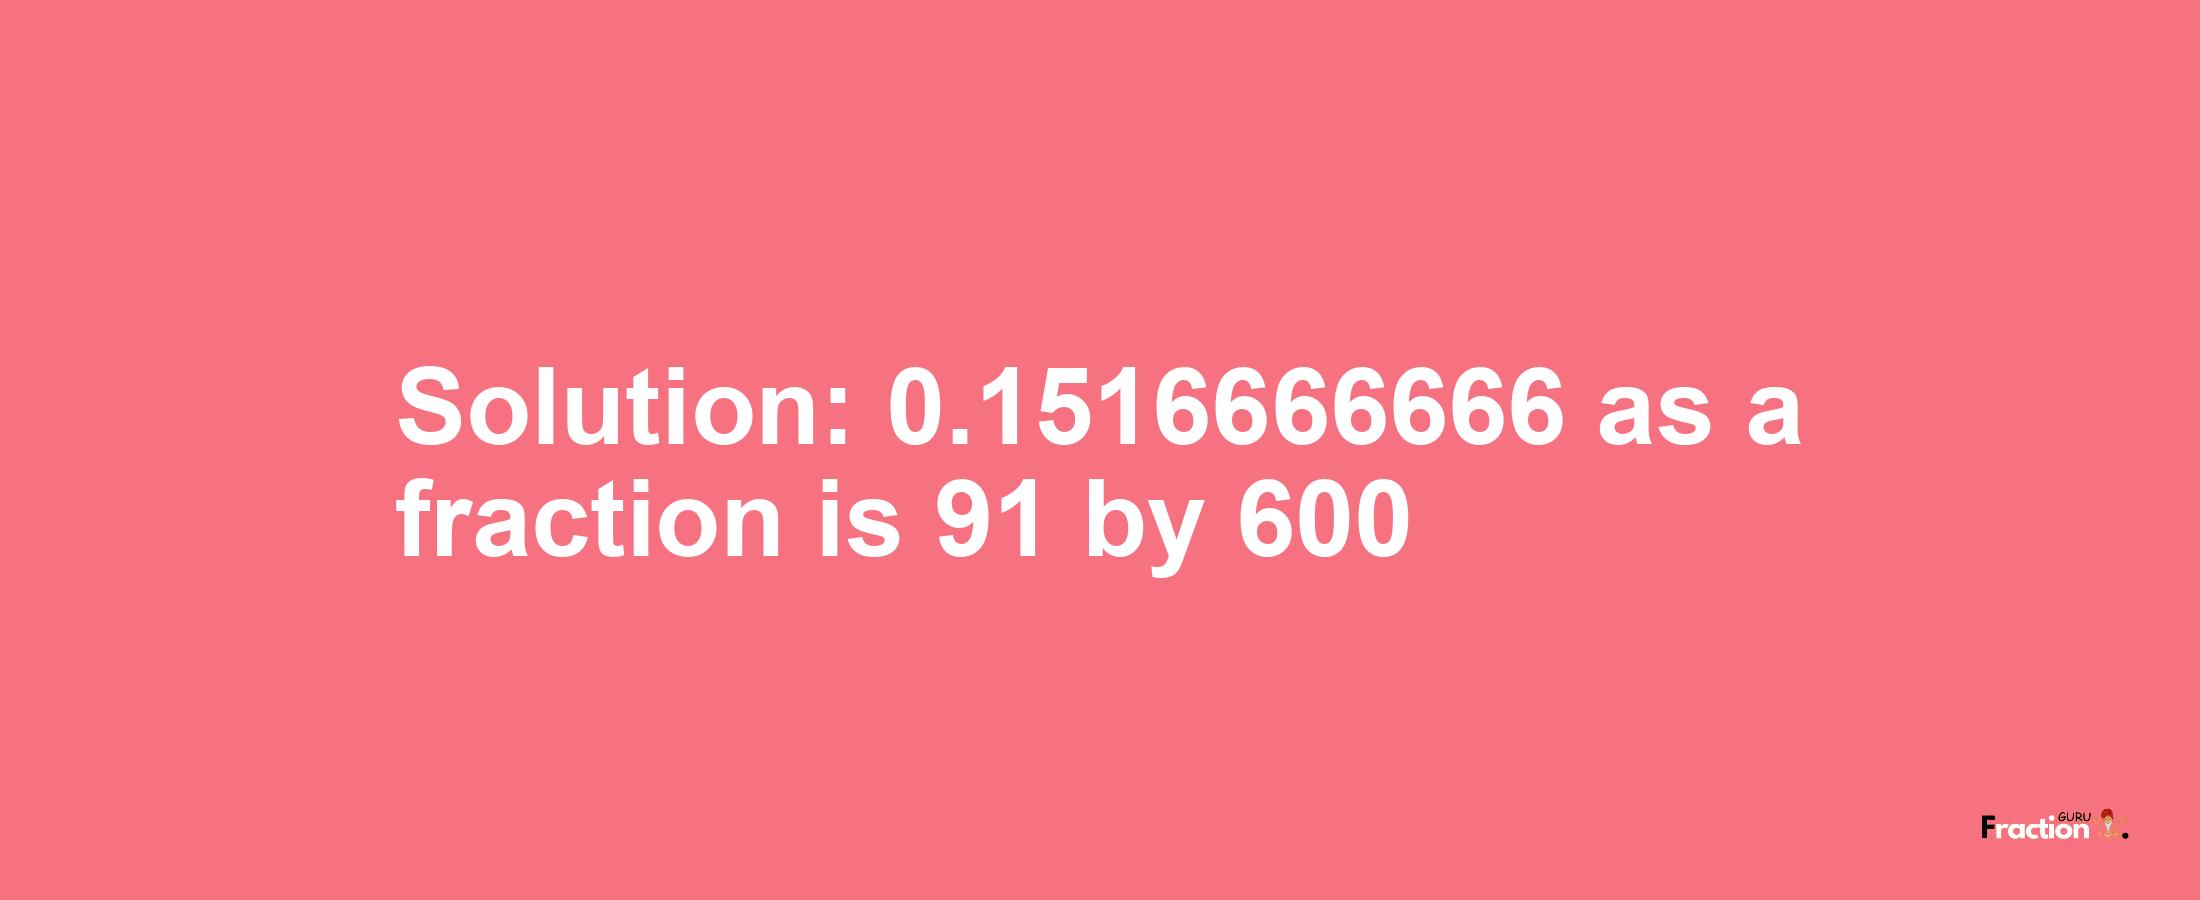 Solution:0.1516666666 as a fraction is 91/600